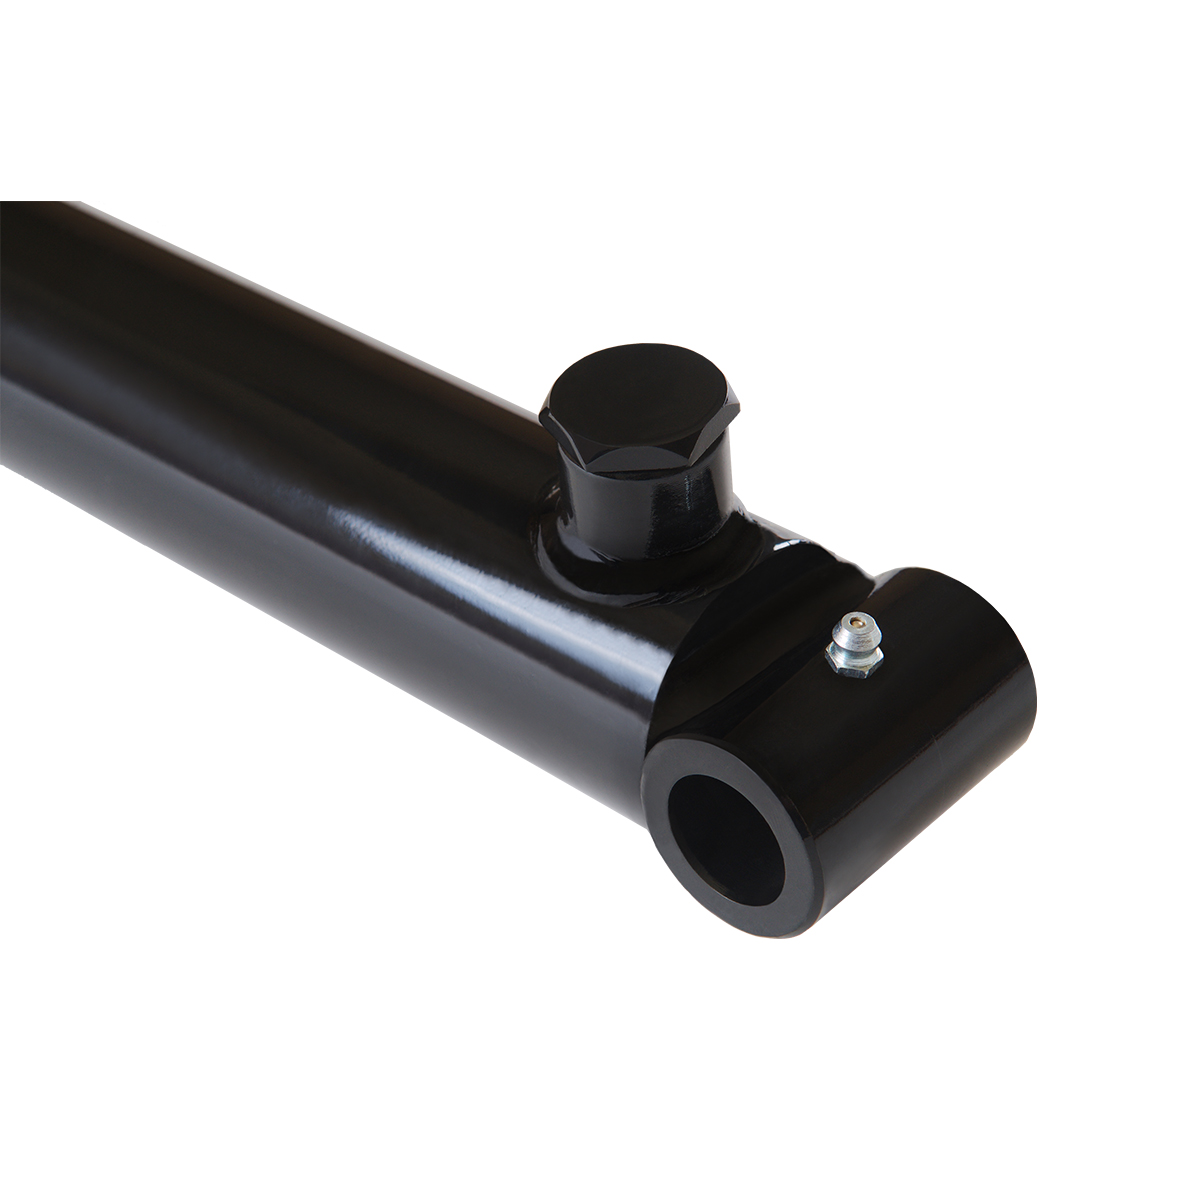 1.5 bore x 10 stroke hydraulic cylinder, welded cross tube double acting cylinder | Magister Hydraulics